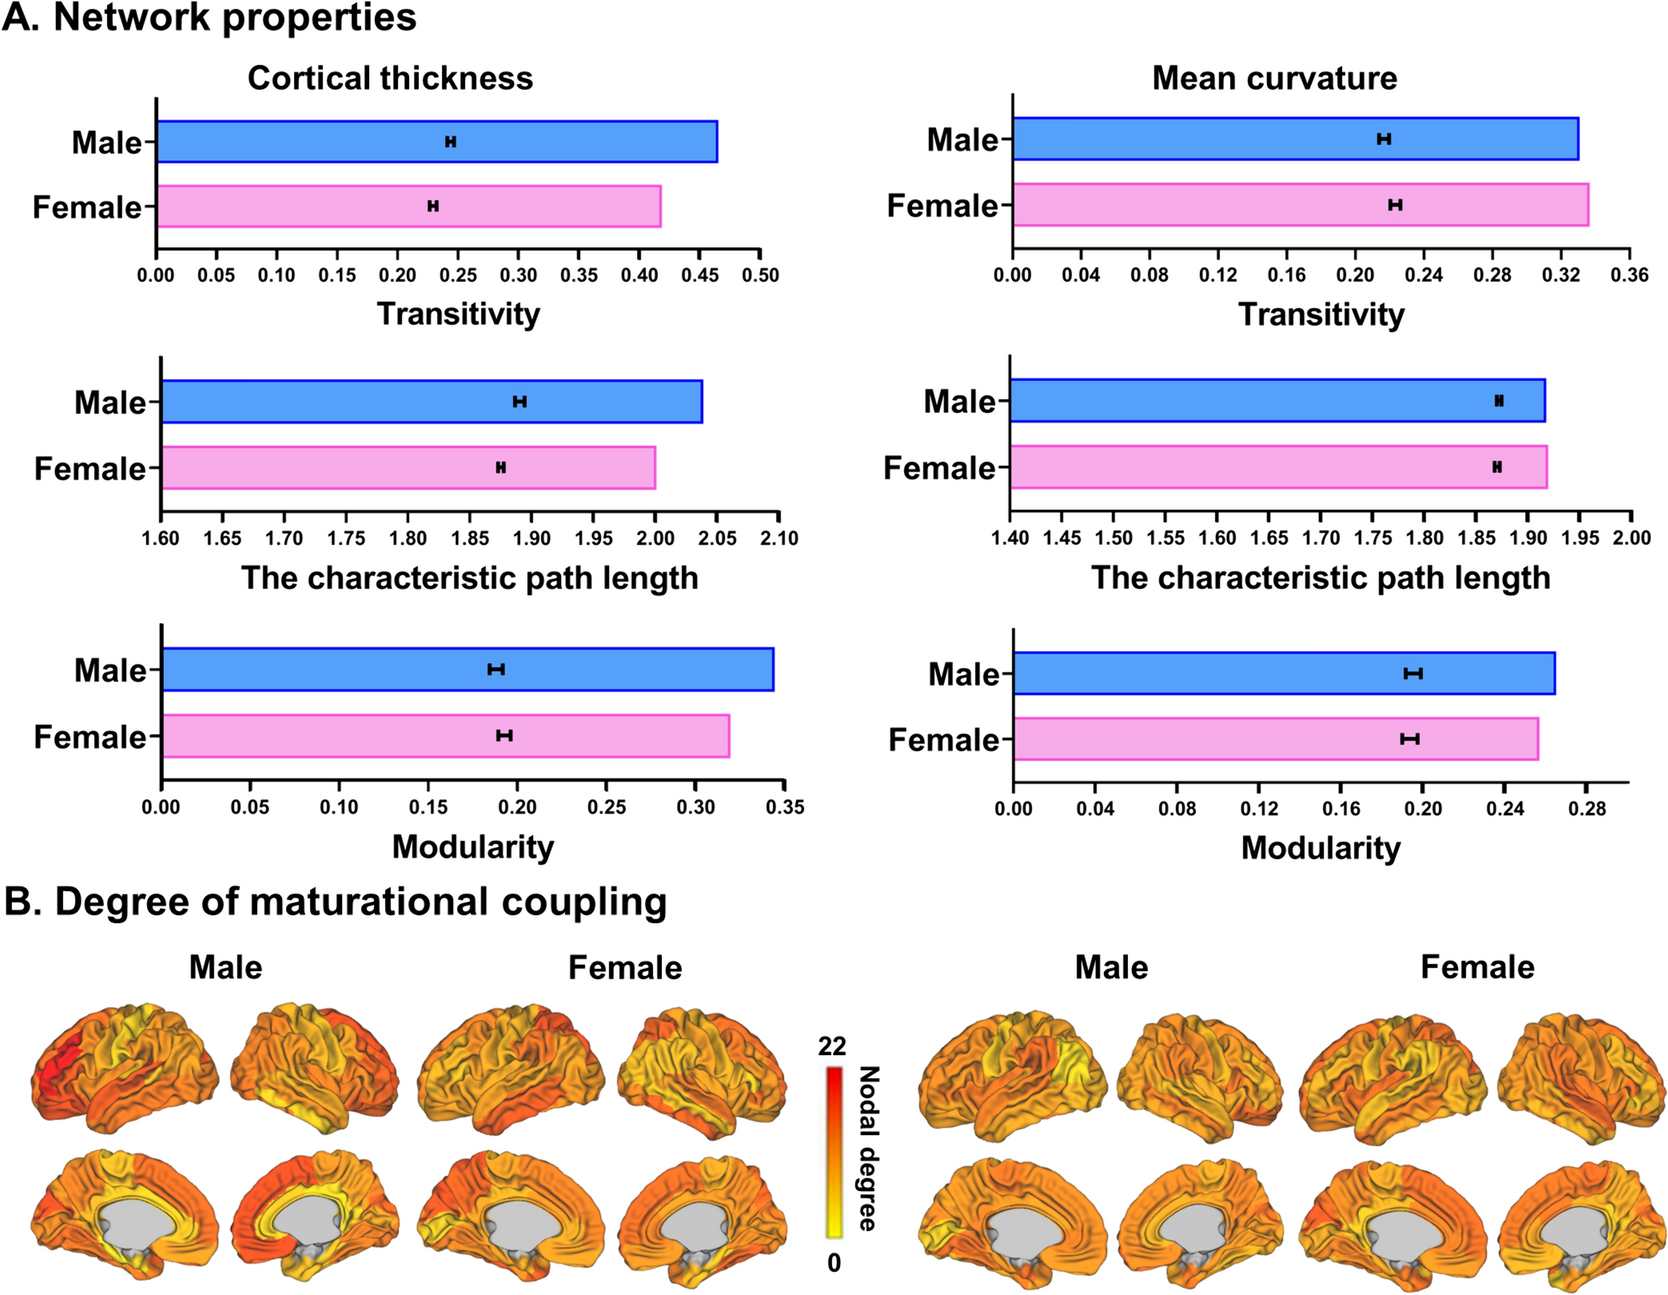 No sex difference in maturation of brain morphology during the perinatal period